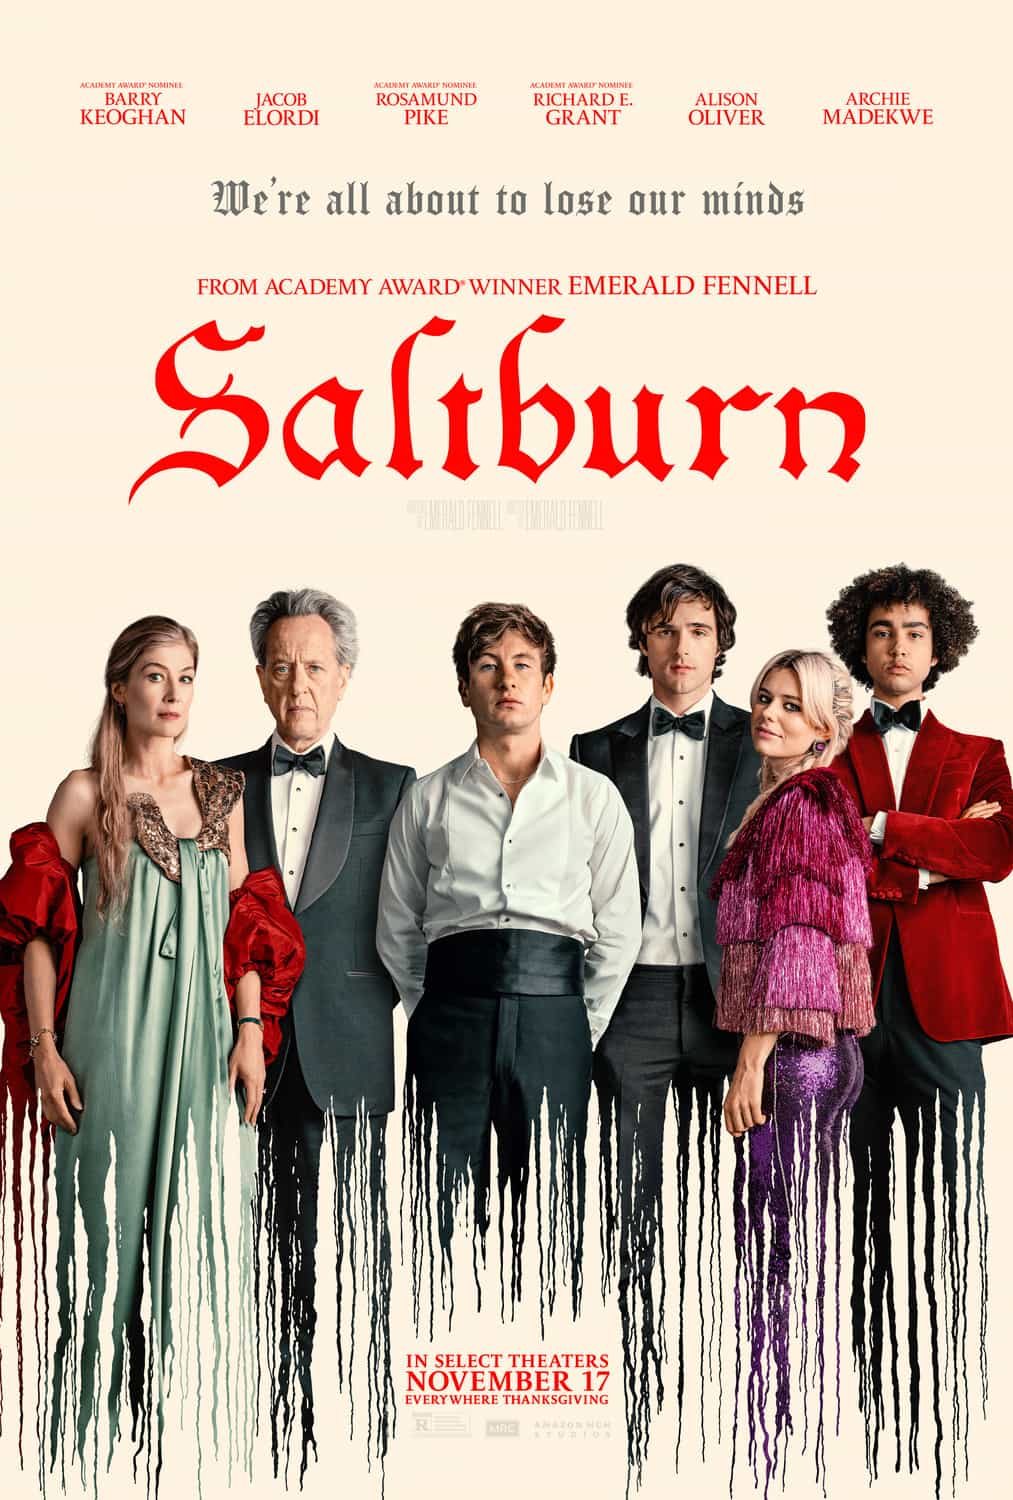 Check out the new trailer and poster for upcoming movie Saltburn which stars Barry Keoghan and Jacob Elordi - movie UK release date 17th November 2023 #saltburn